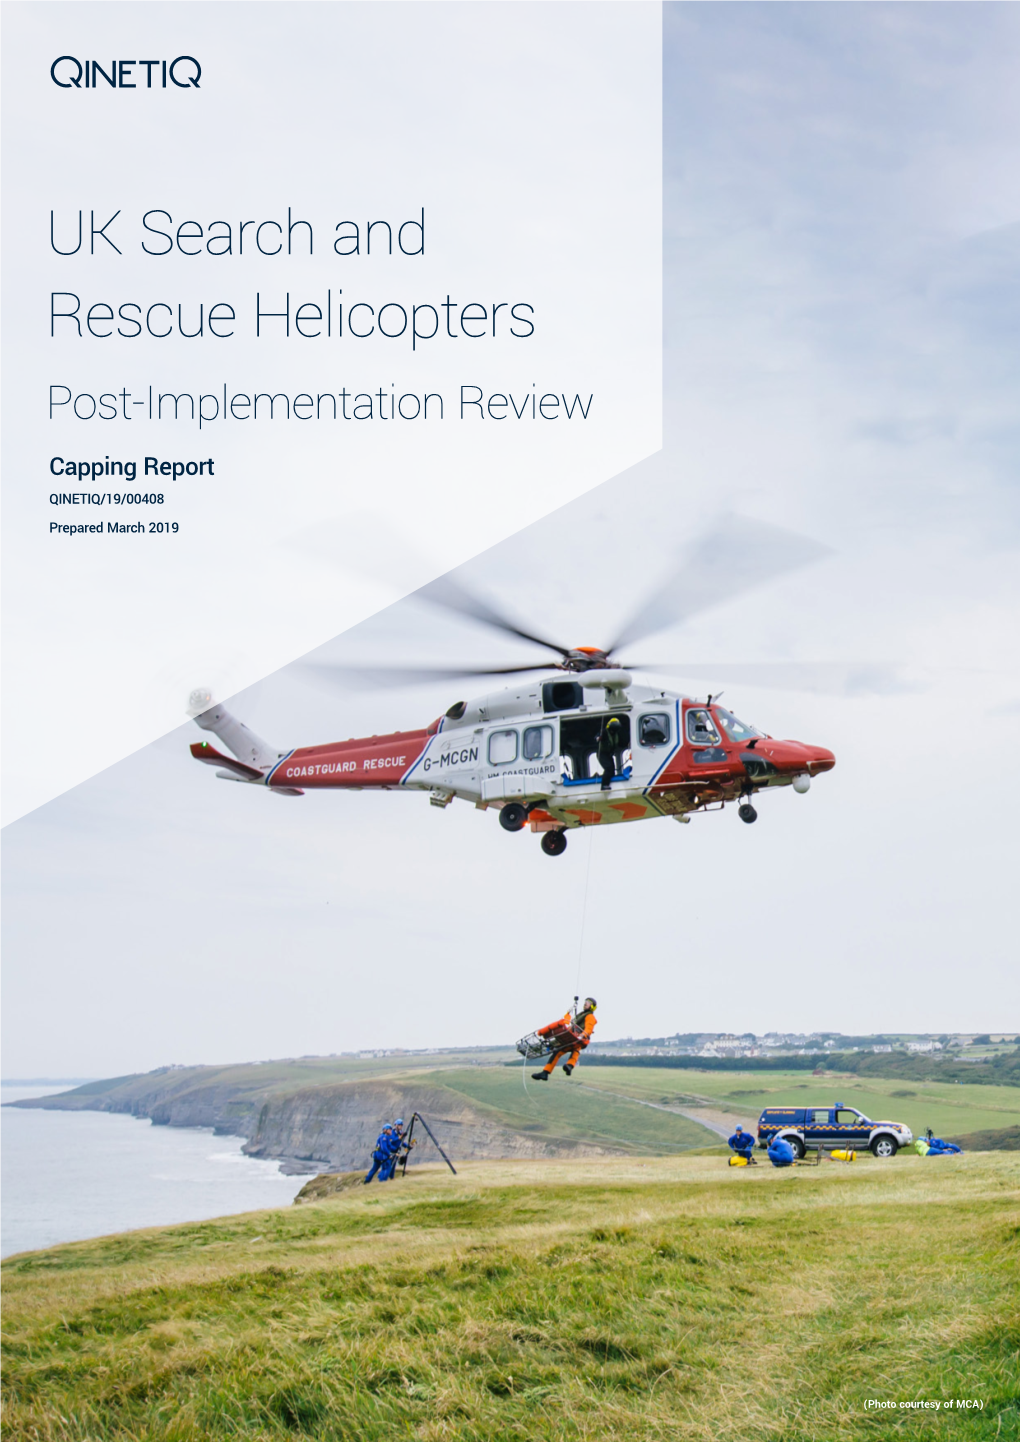 UK Search and Rescue Helicopters Post-Implementation Review Capping Report QINETIQ/19/00408 Prepared March 2019